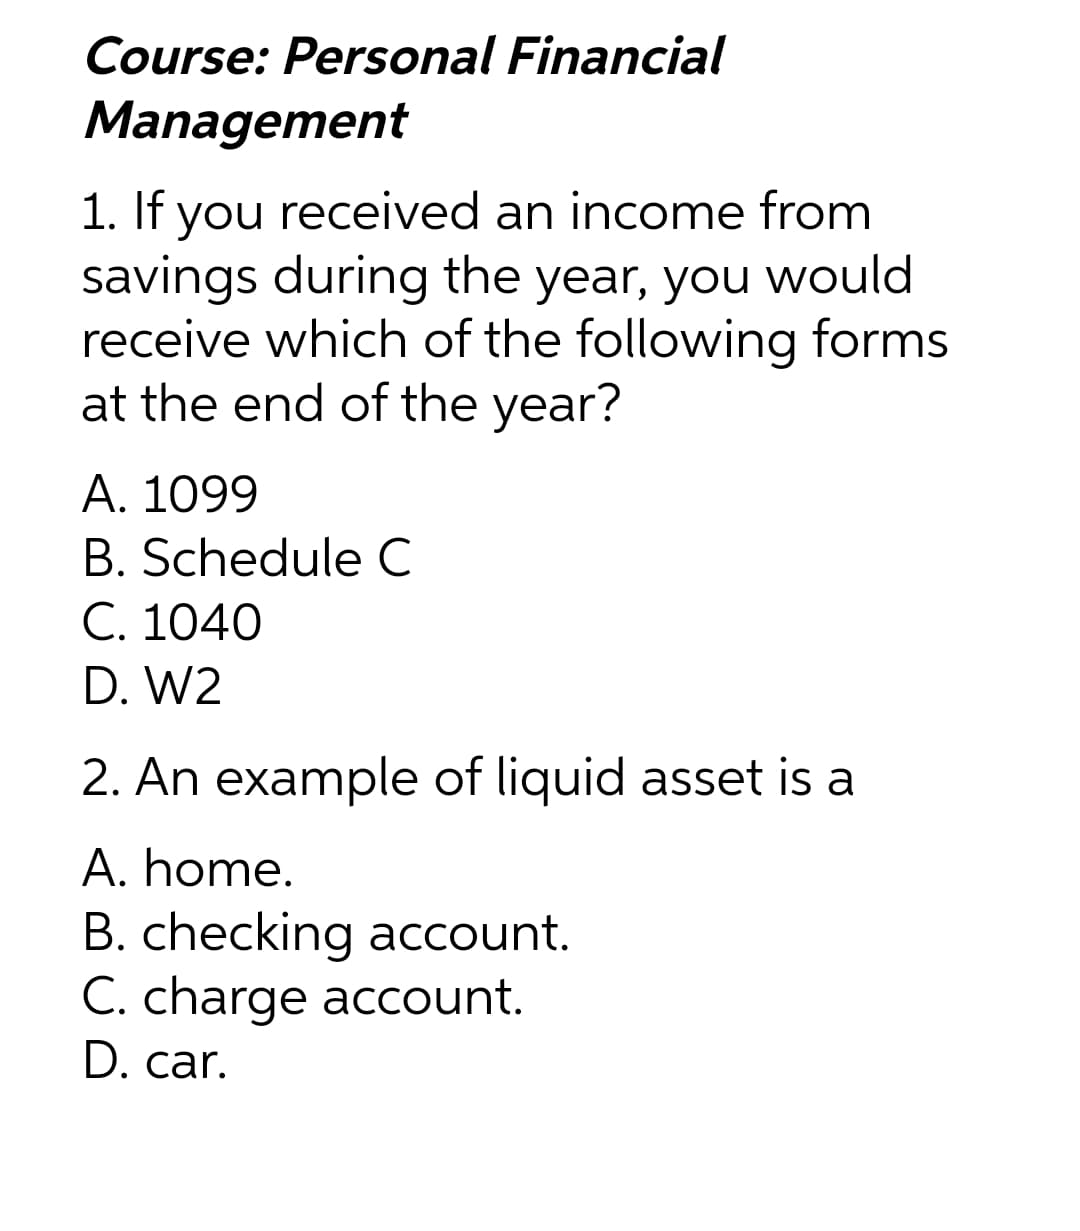 Course: Personal Financial
Management
1. If you received an income from
savings during the year, you would
receive which of the following forms
at the end of the year?
A. 1099
B. Schedule C
C. 1040
D. W2
2. An example of liquid asset is a
A. home.
B. checking account.
C. charge account.
D. car.
